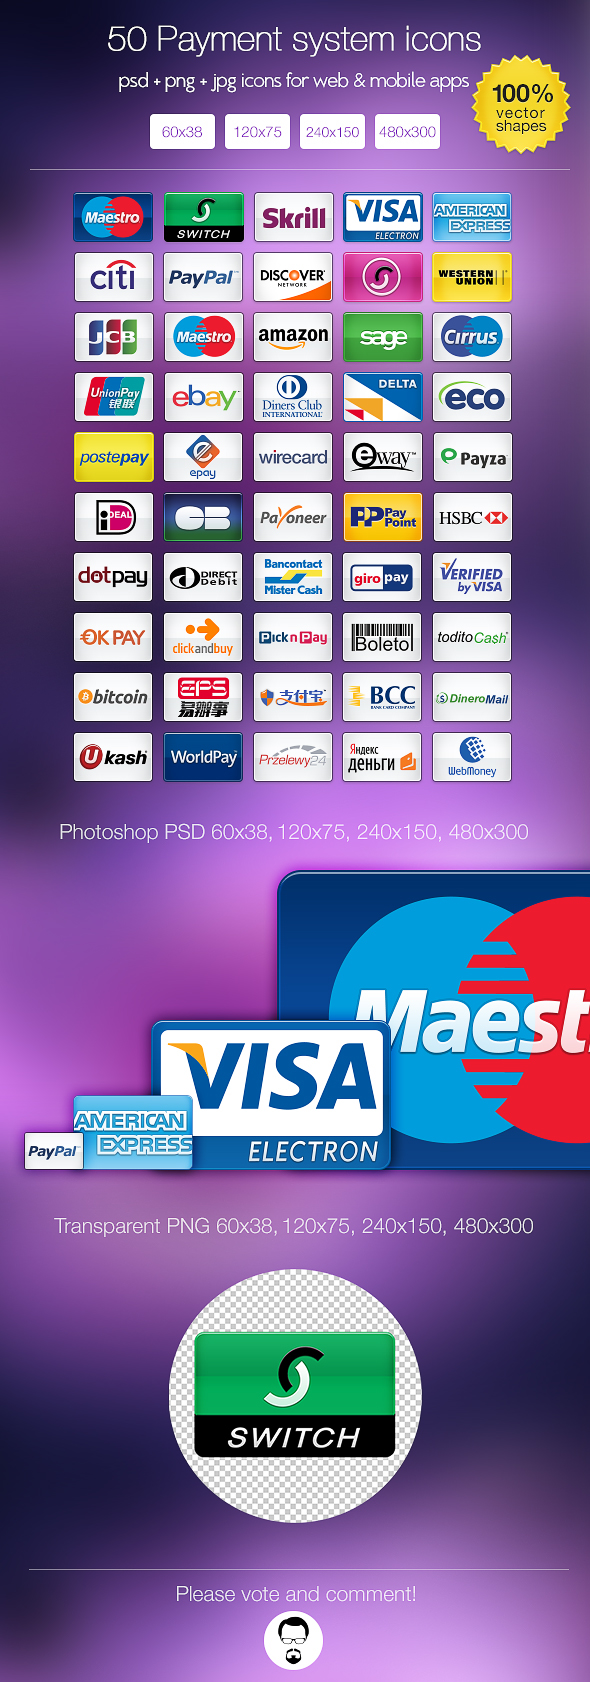 e-commerce credit card icons payment system transfers maestro skrill Visa American Express paypal Amazon eBay Sage mastercard